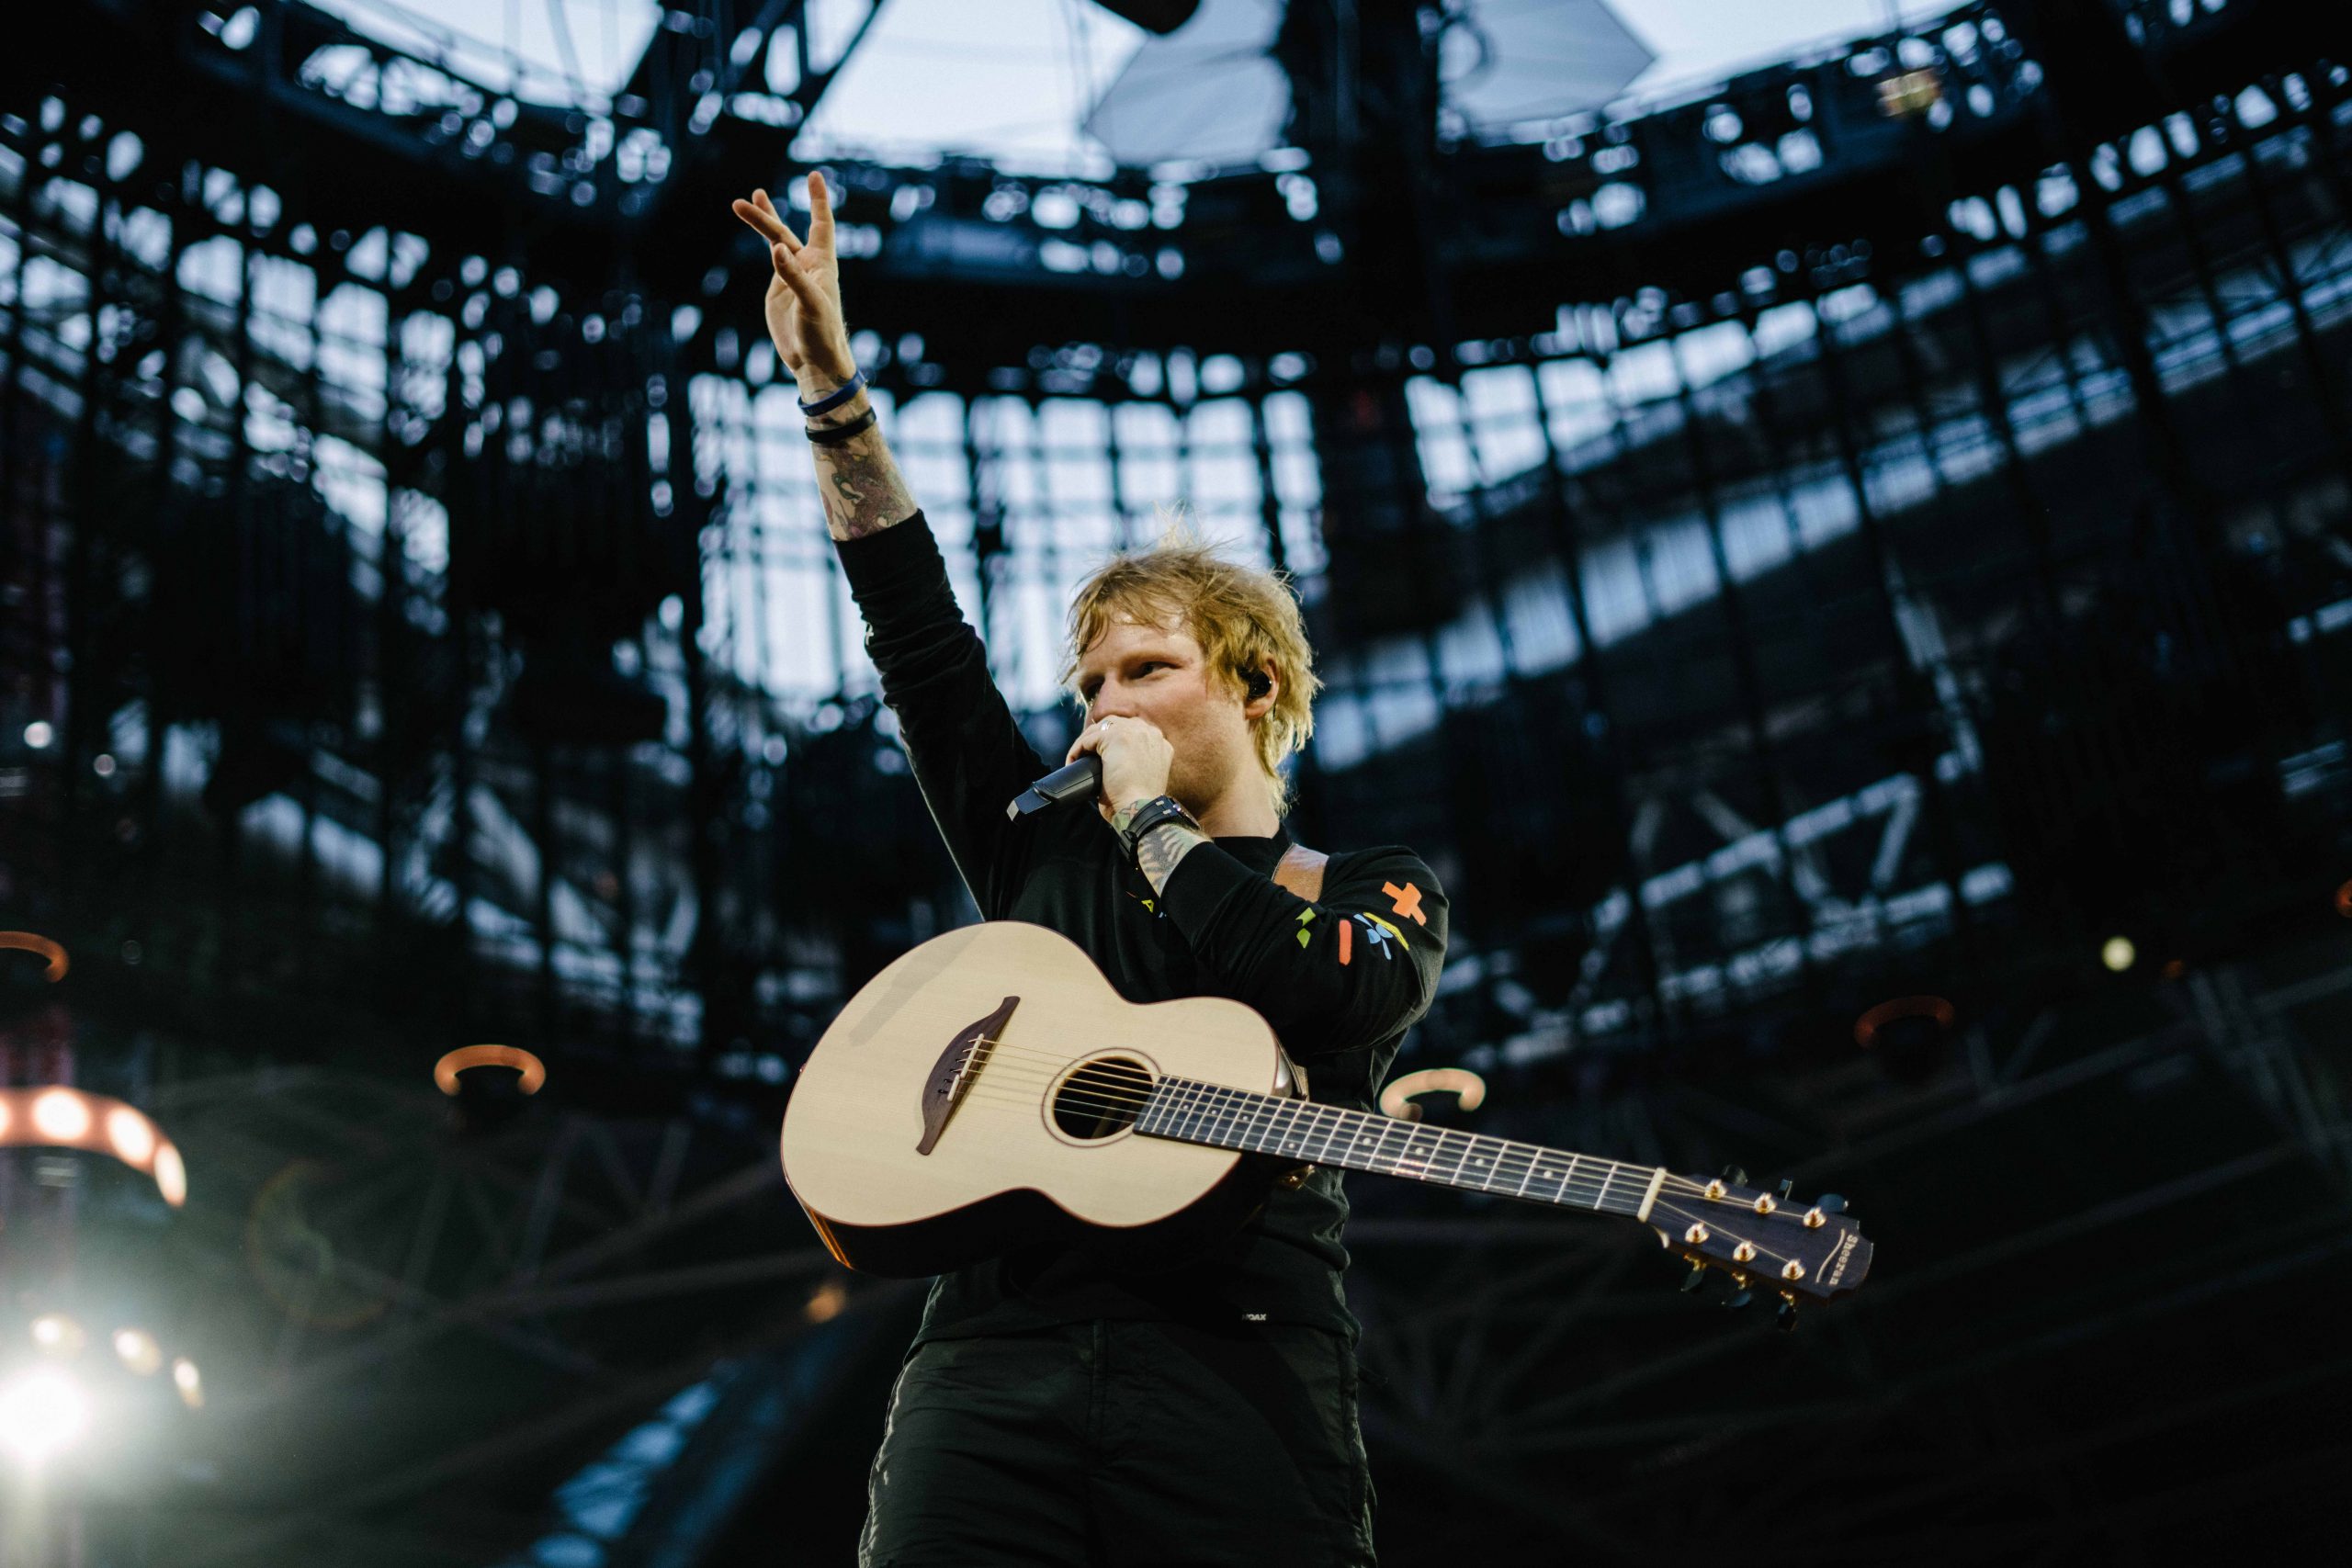 Ed Sheeran makes a peace sign during a performance